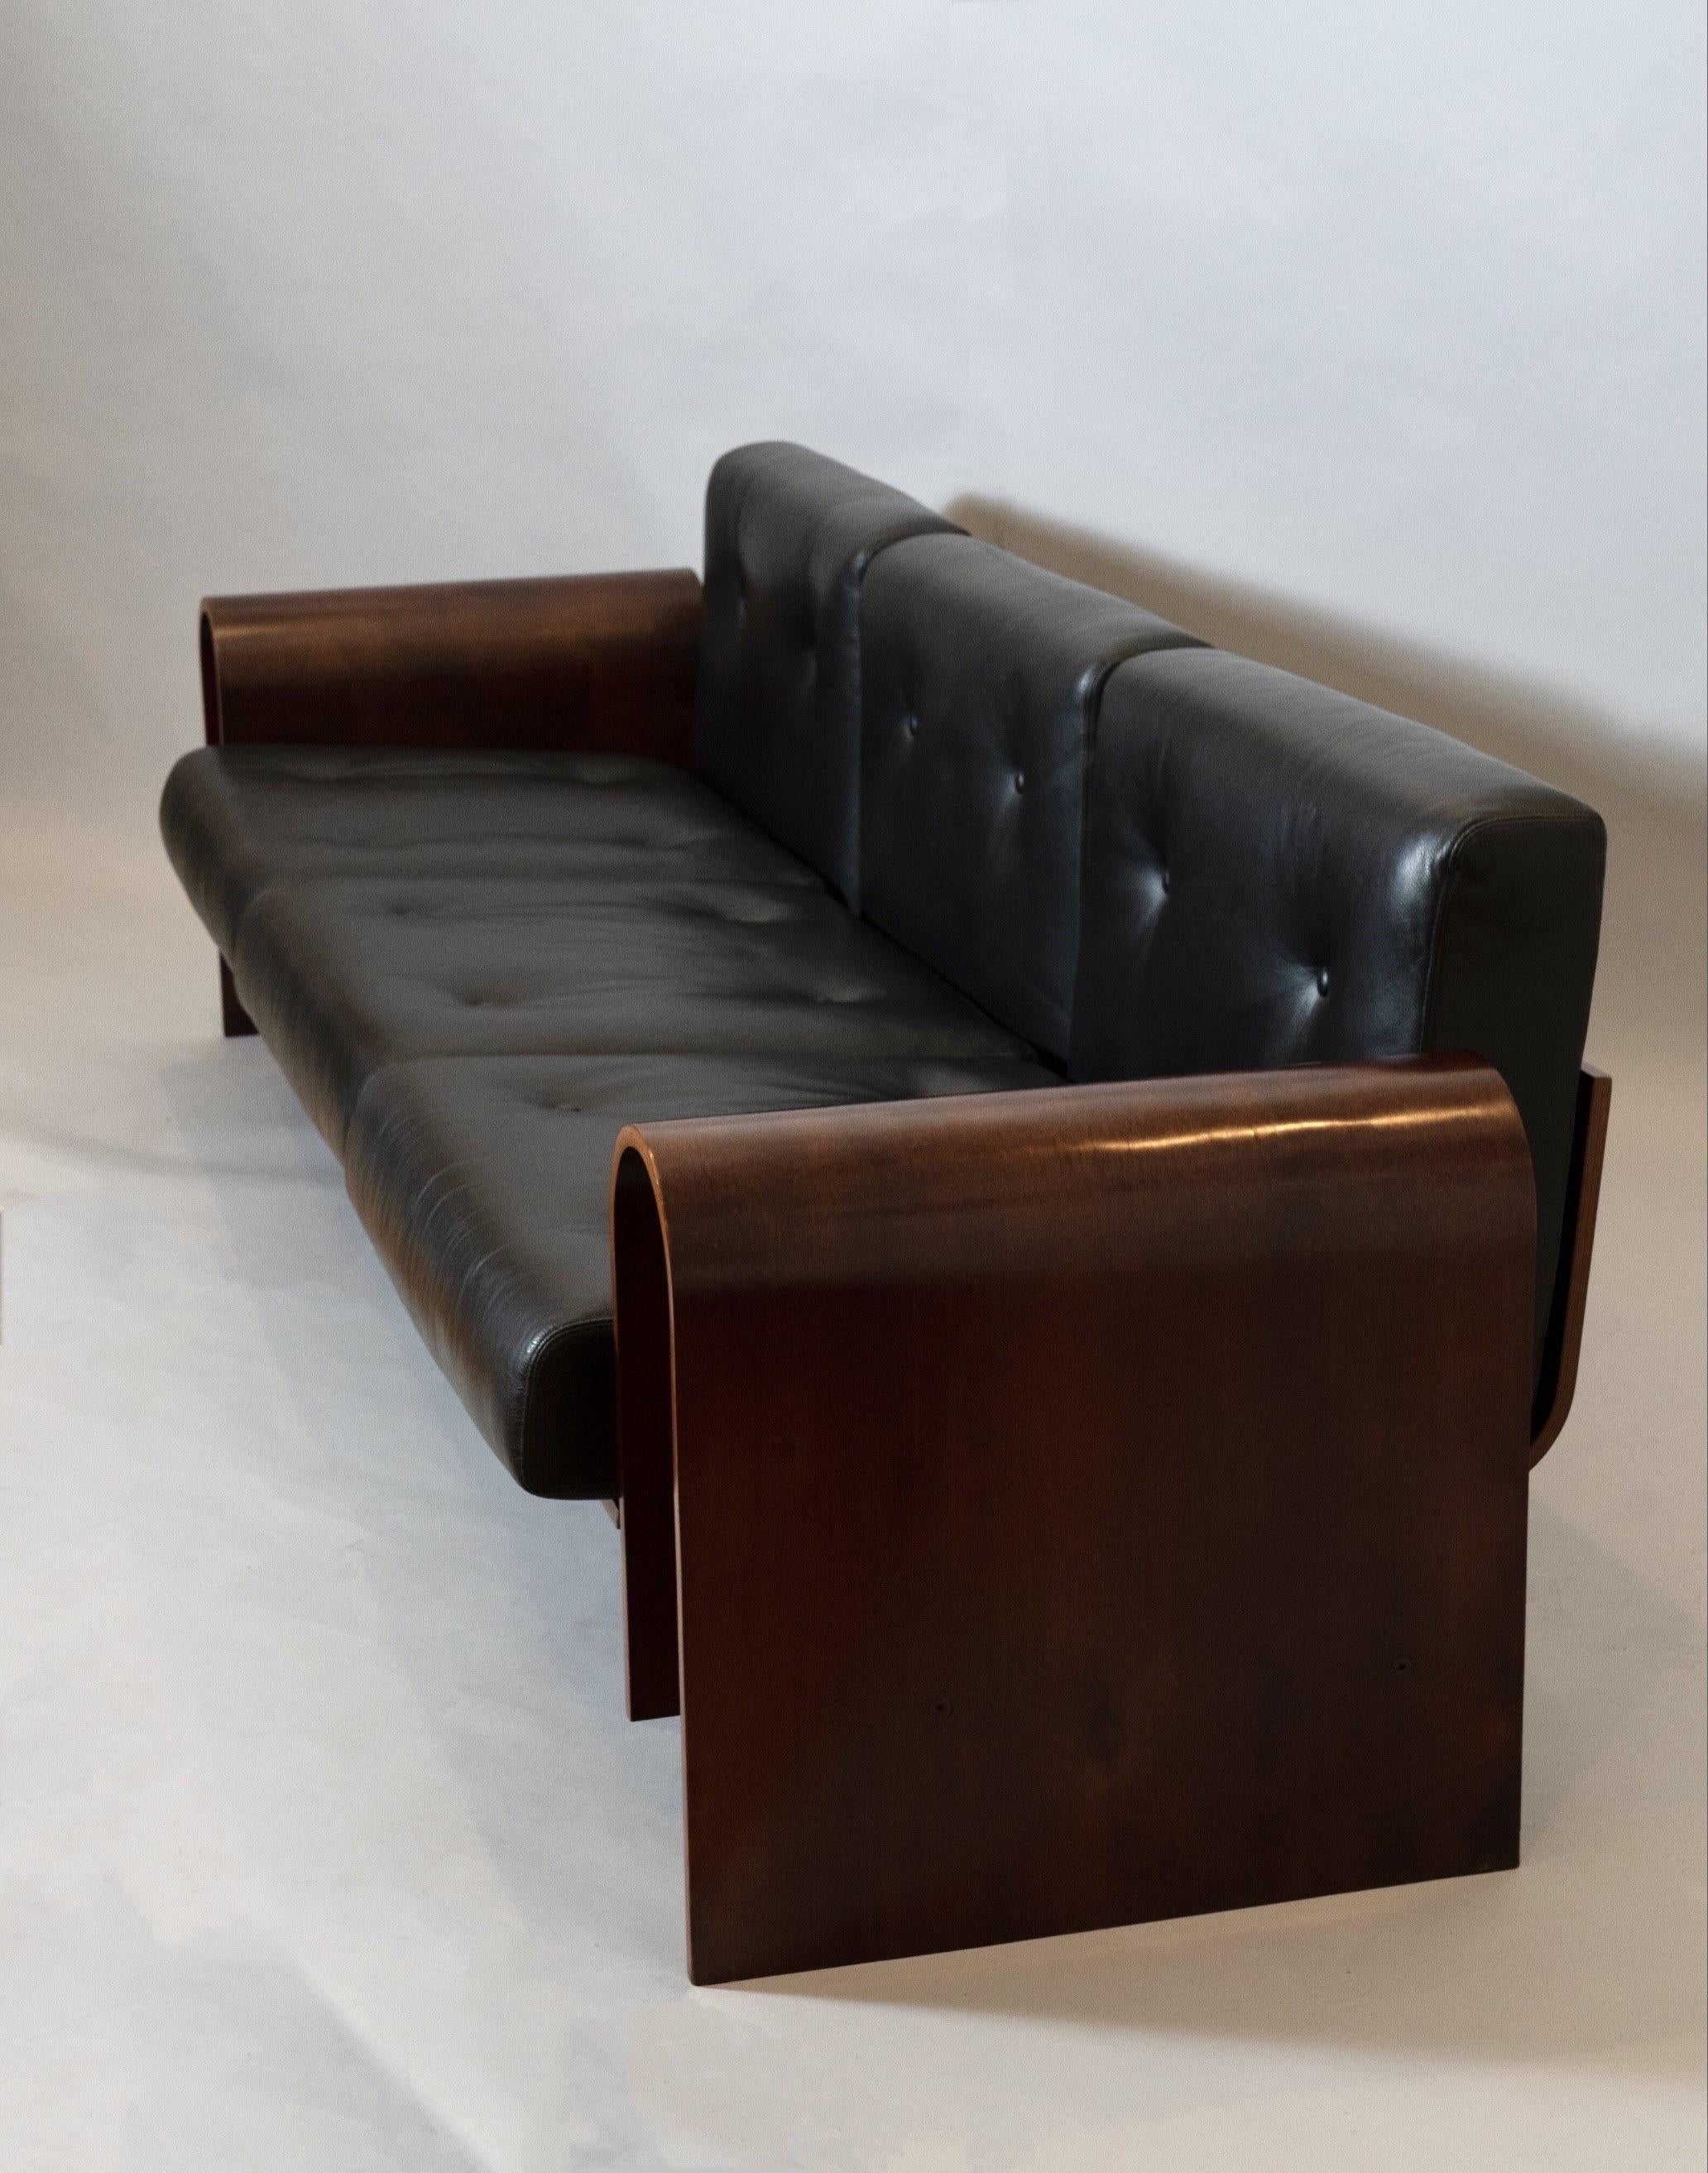 Oscar Niemeyer Exceptional Sofa in Rosewood and Leather, Hotel SESC, Brazil 1990 For Sale 3